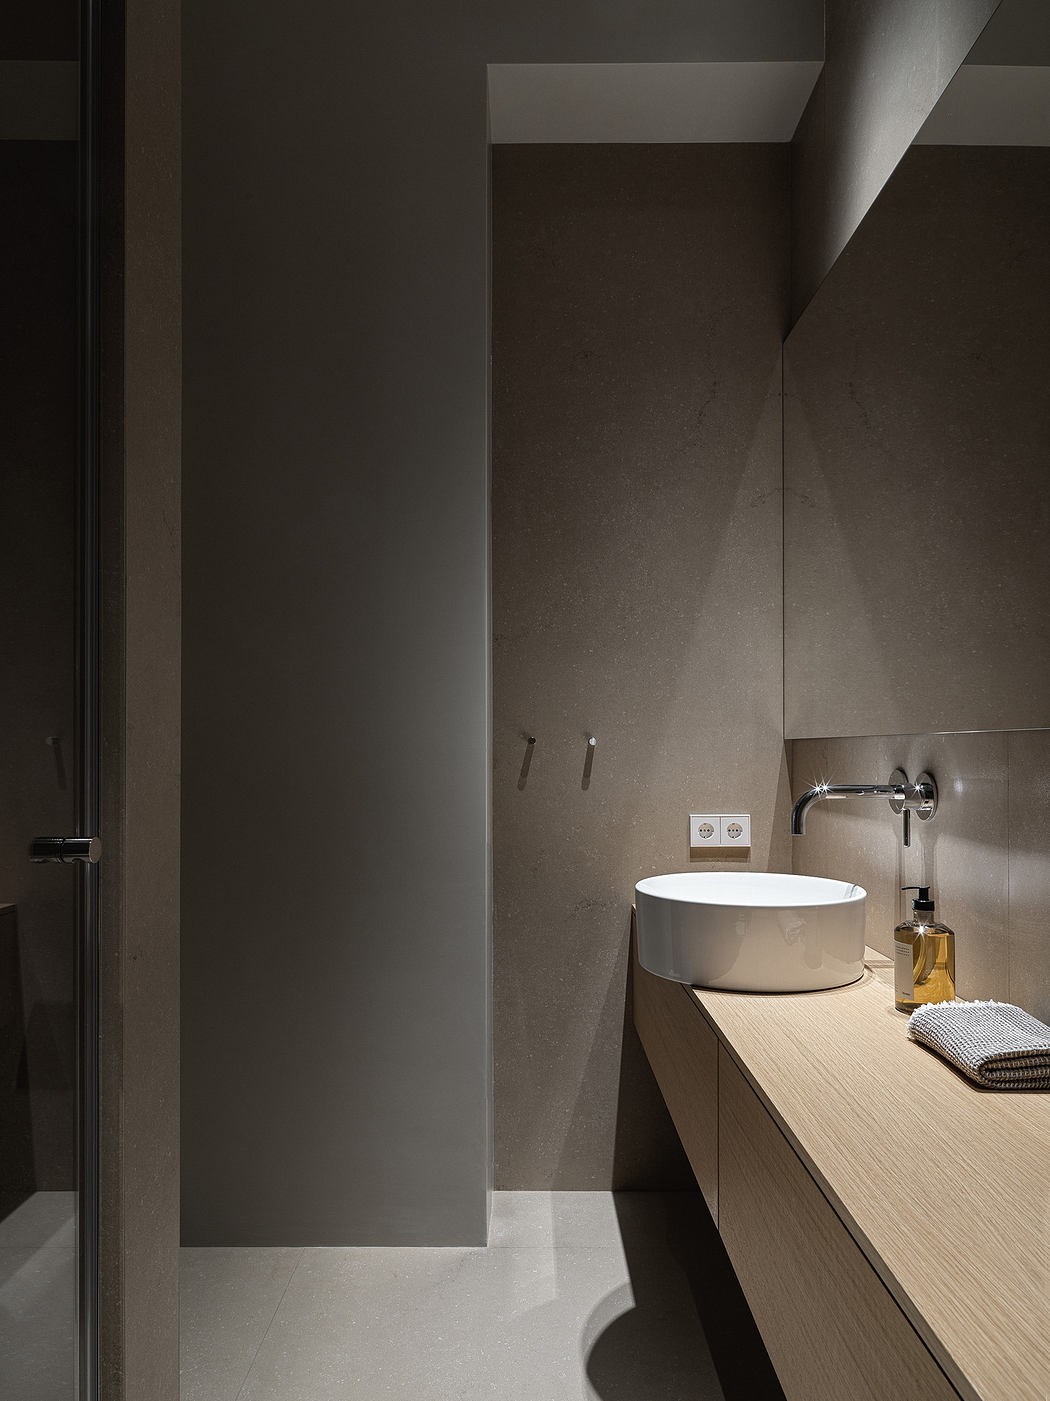 Minimalist bathroom with a sleek basin on a wooden vanity, muted tones, and